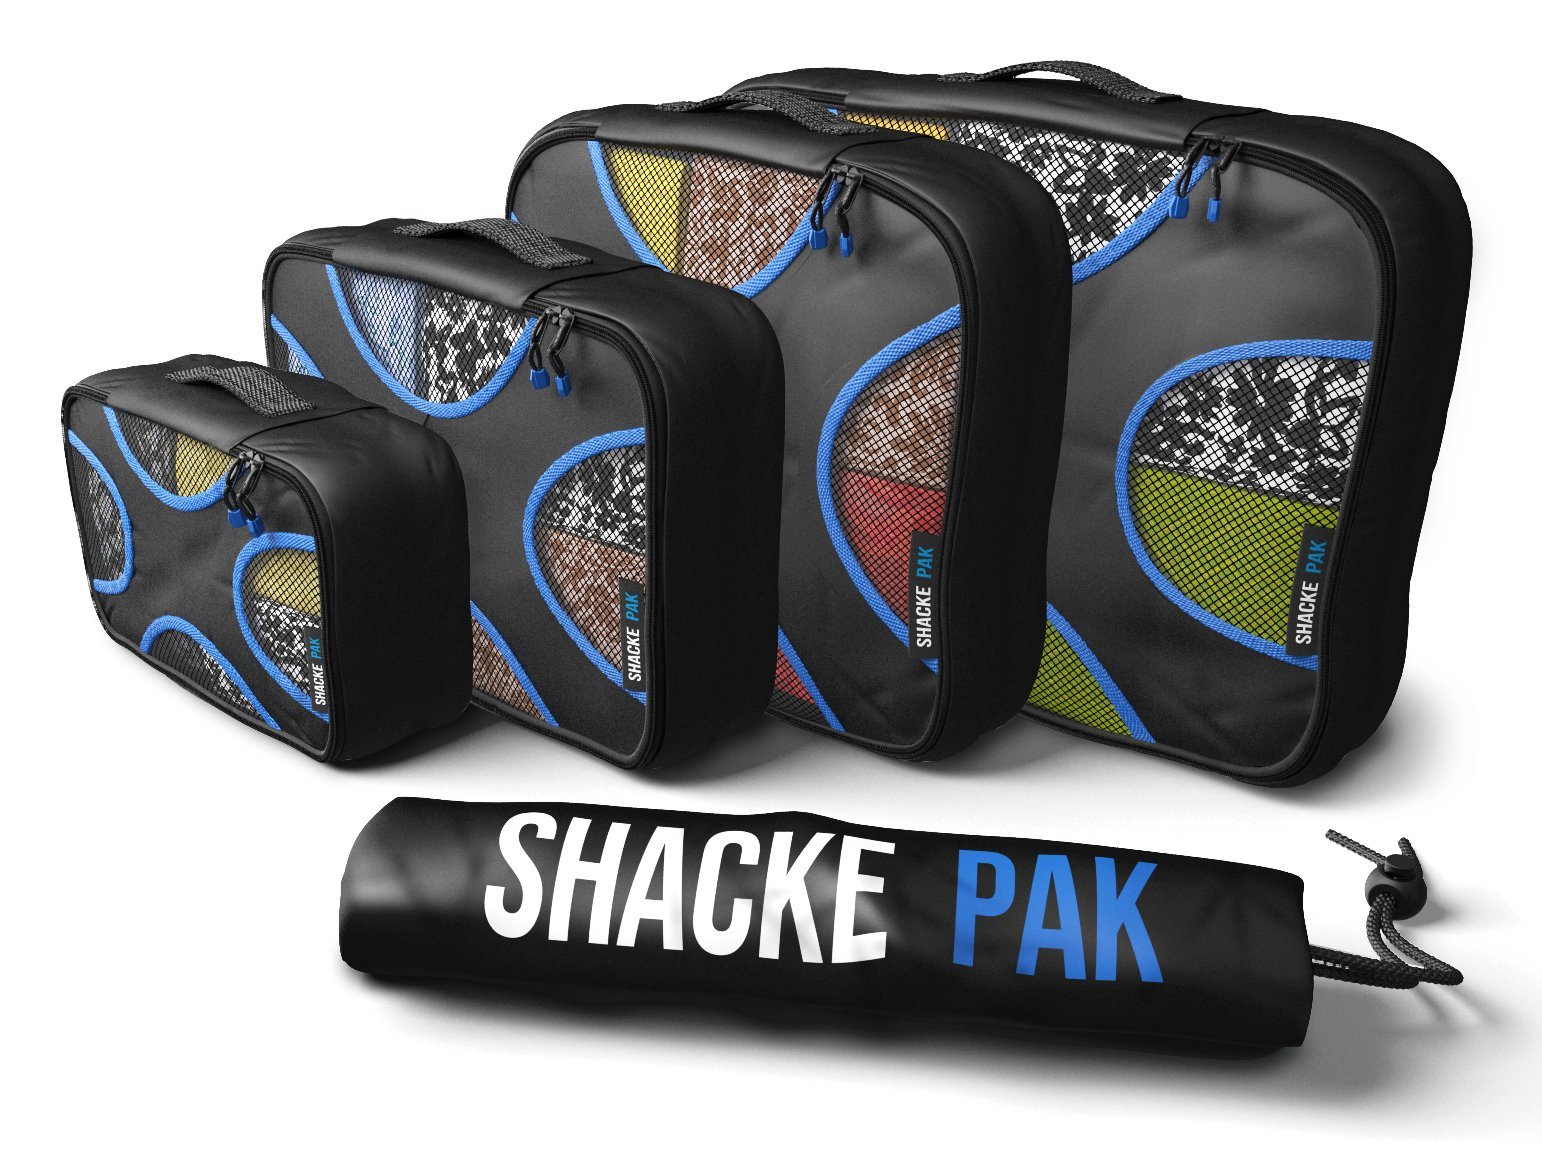 Book Cover Shacke Pak - 5 Set Packing Cubes - Travel Luggage Organizers with Laundry Bag